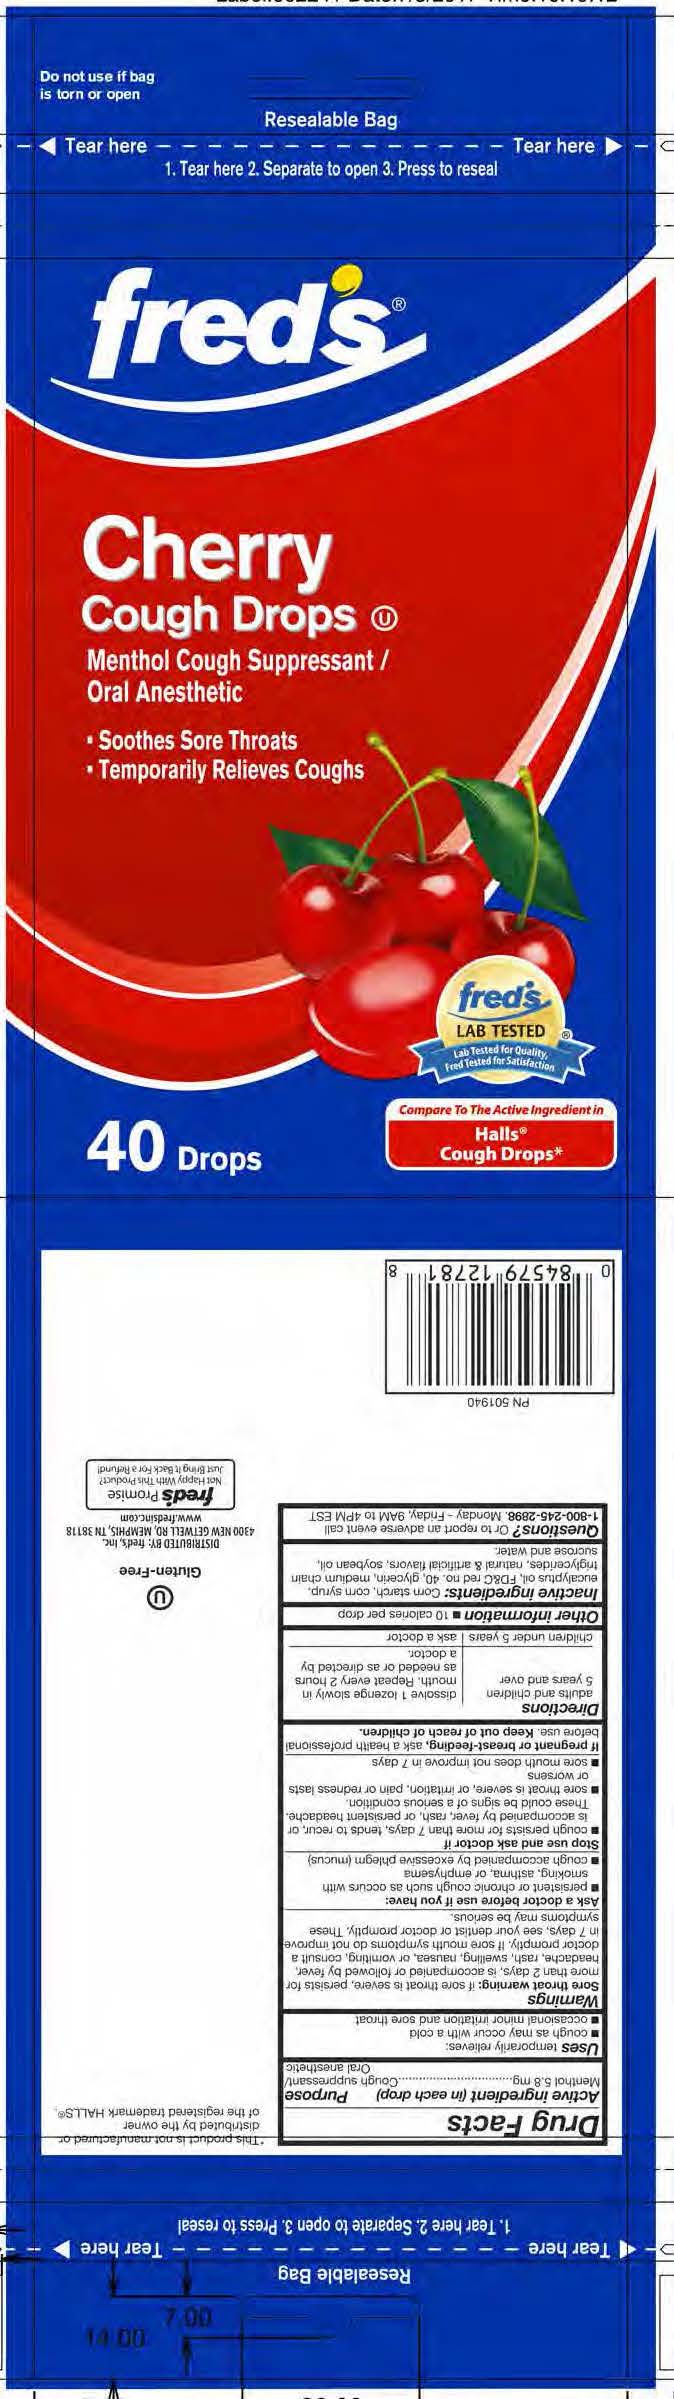 Freds Cherry 40ct cough drops